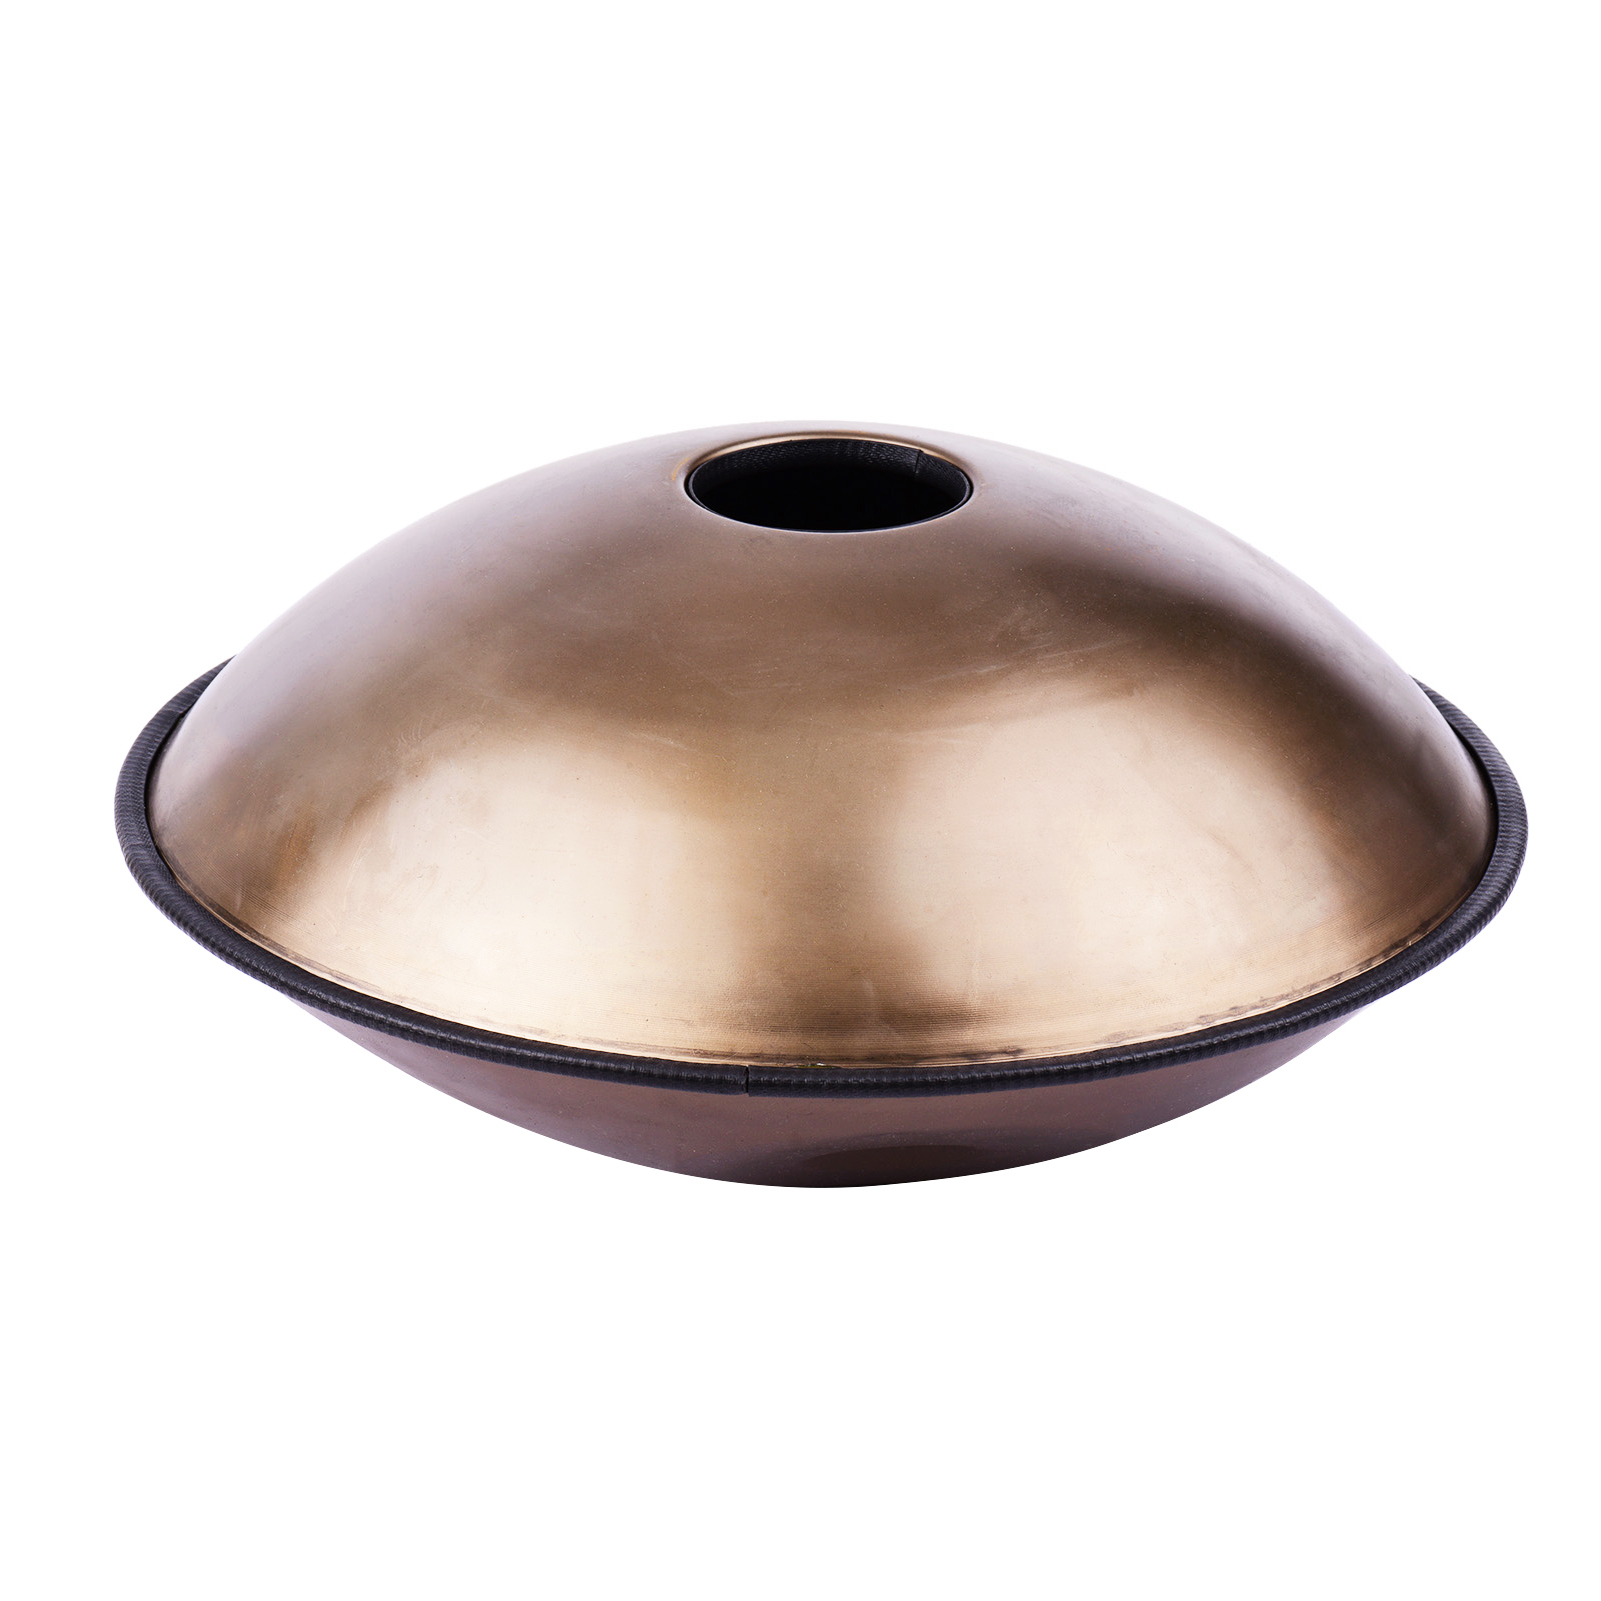 6588 Portable Handpan Hand Pan Hand Drum C-Key 6 Notes(A3 C4 D4 E4 F4 G4)  Percussion Instrument with Carry Bag for Beginners 